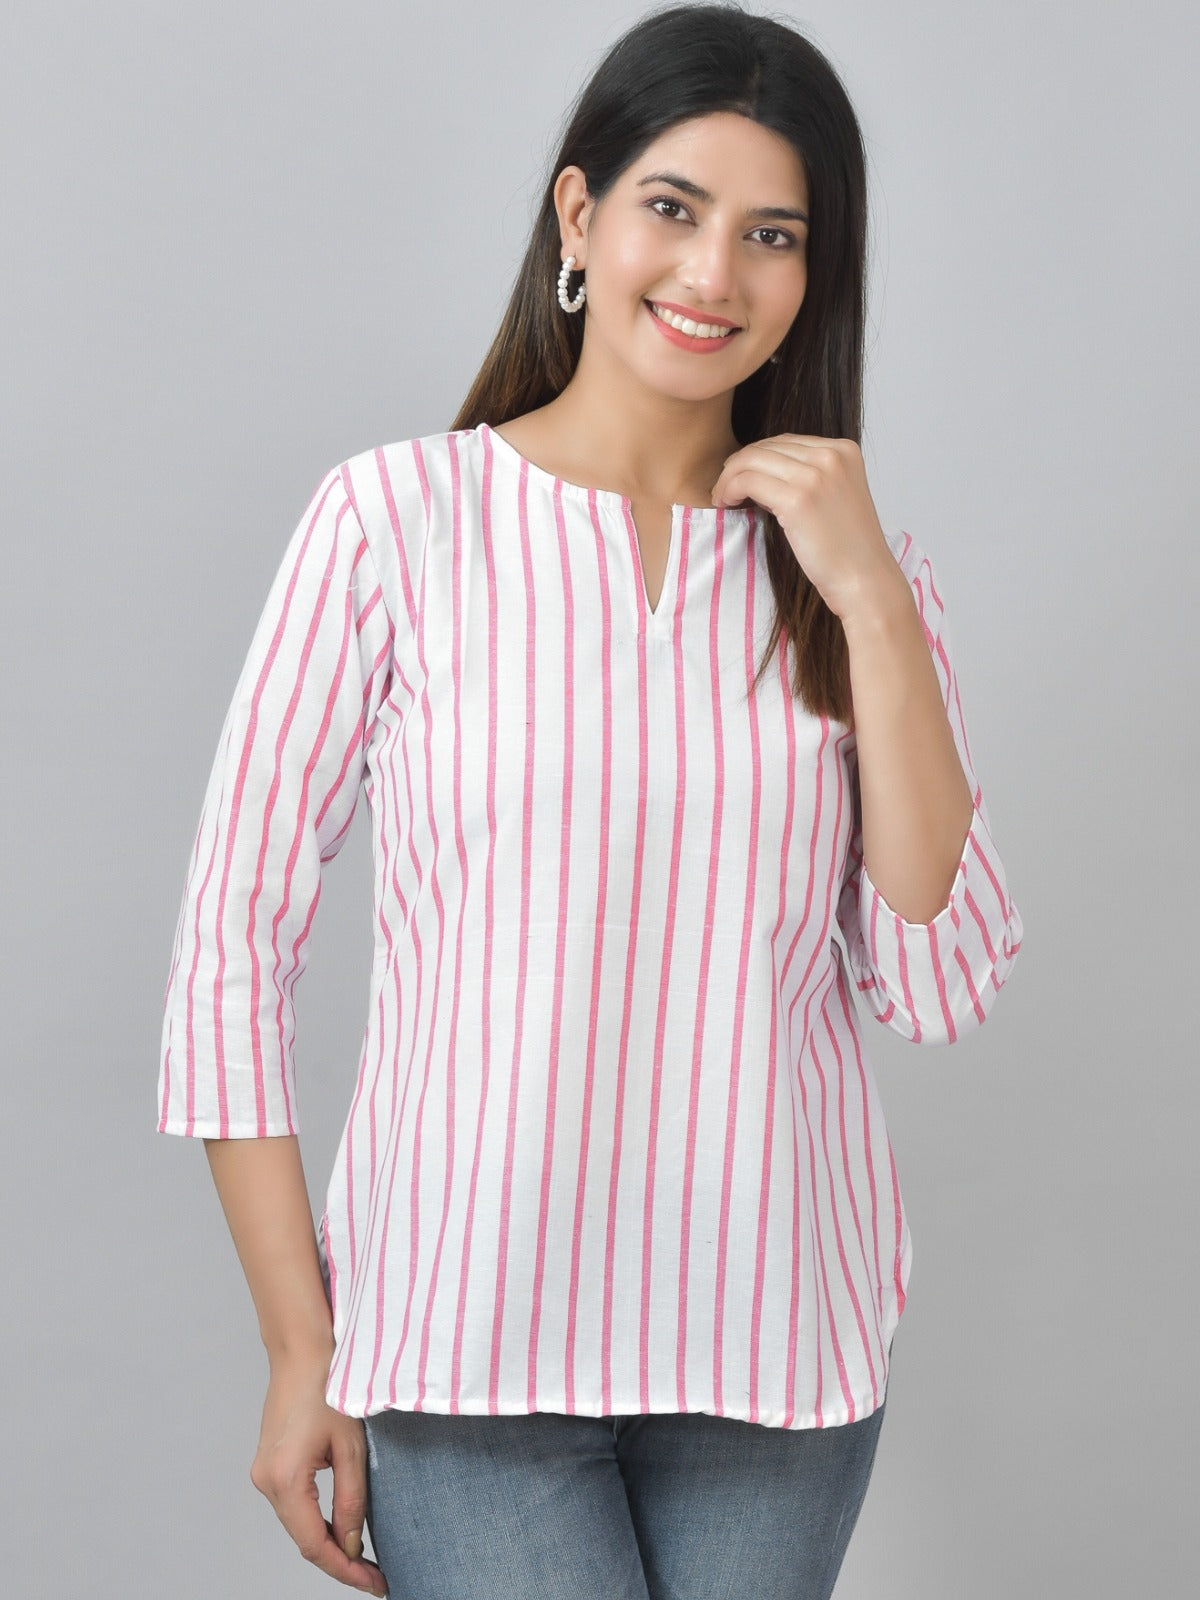 Pack Of 2 Grey And Pink Striped Cotton Womens Top Combo